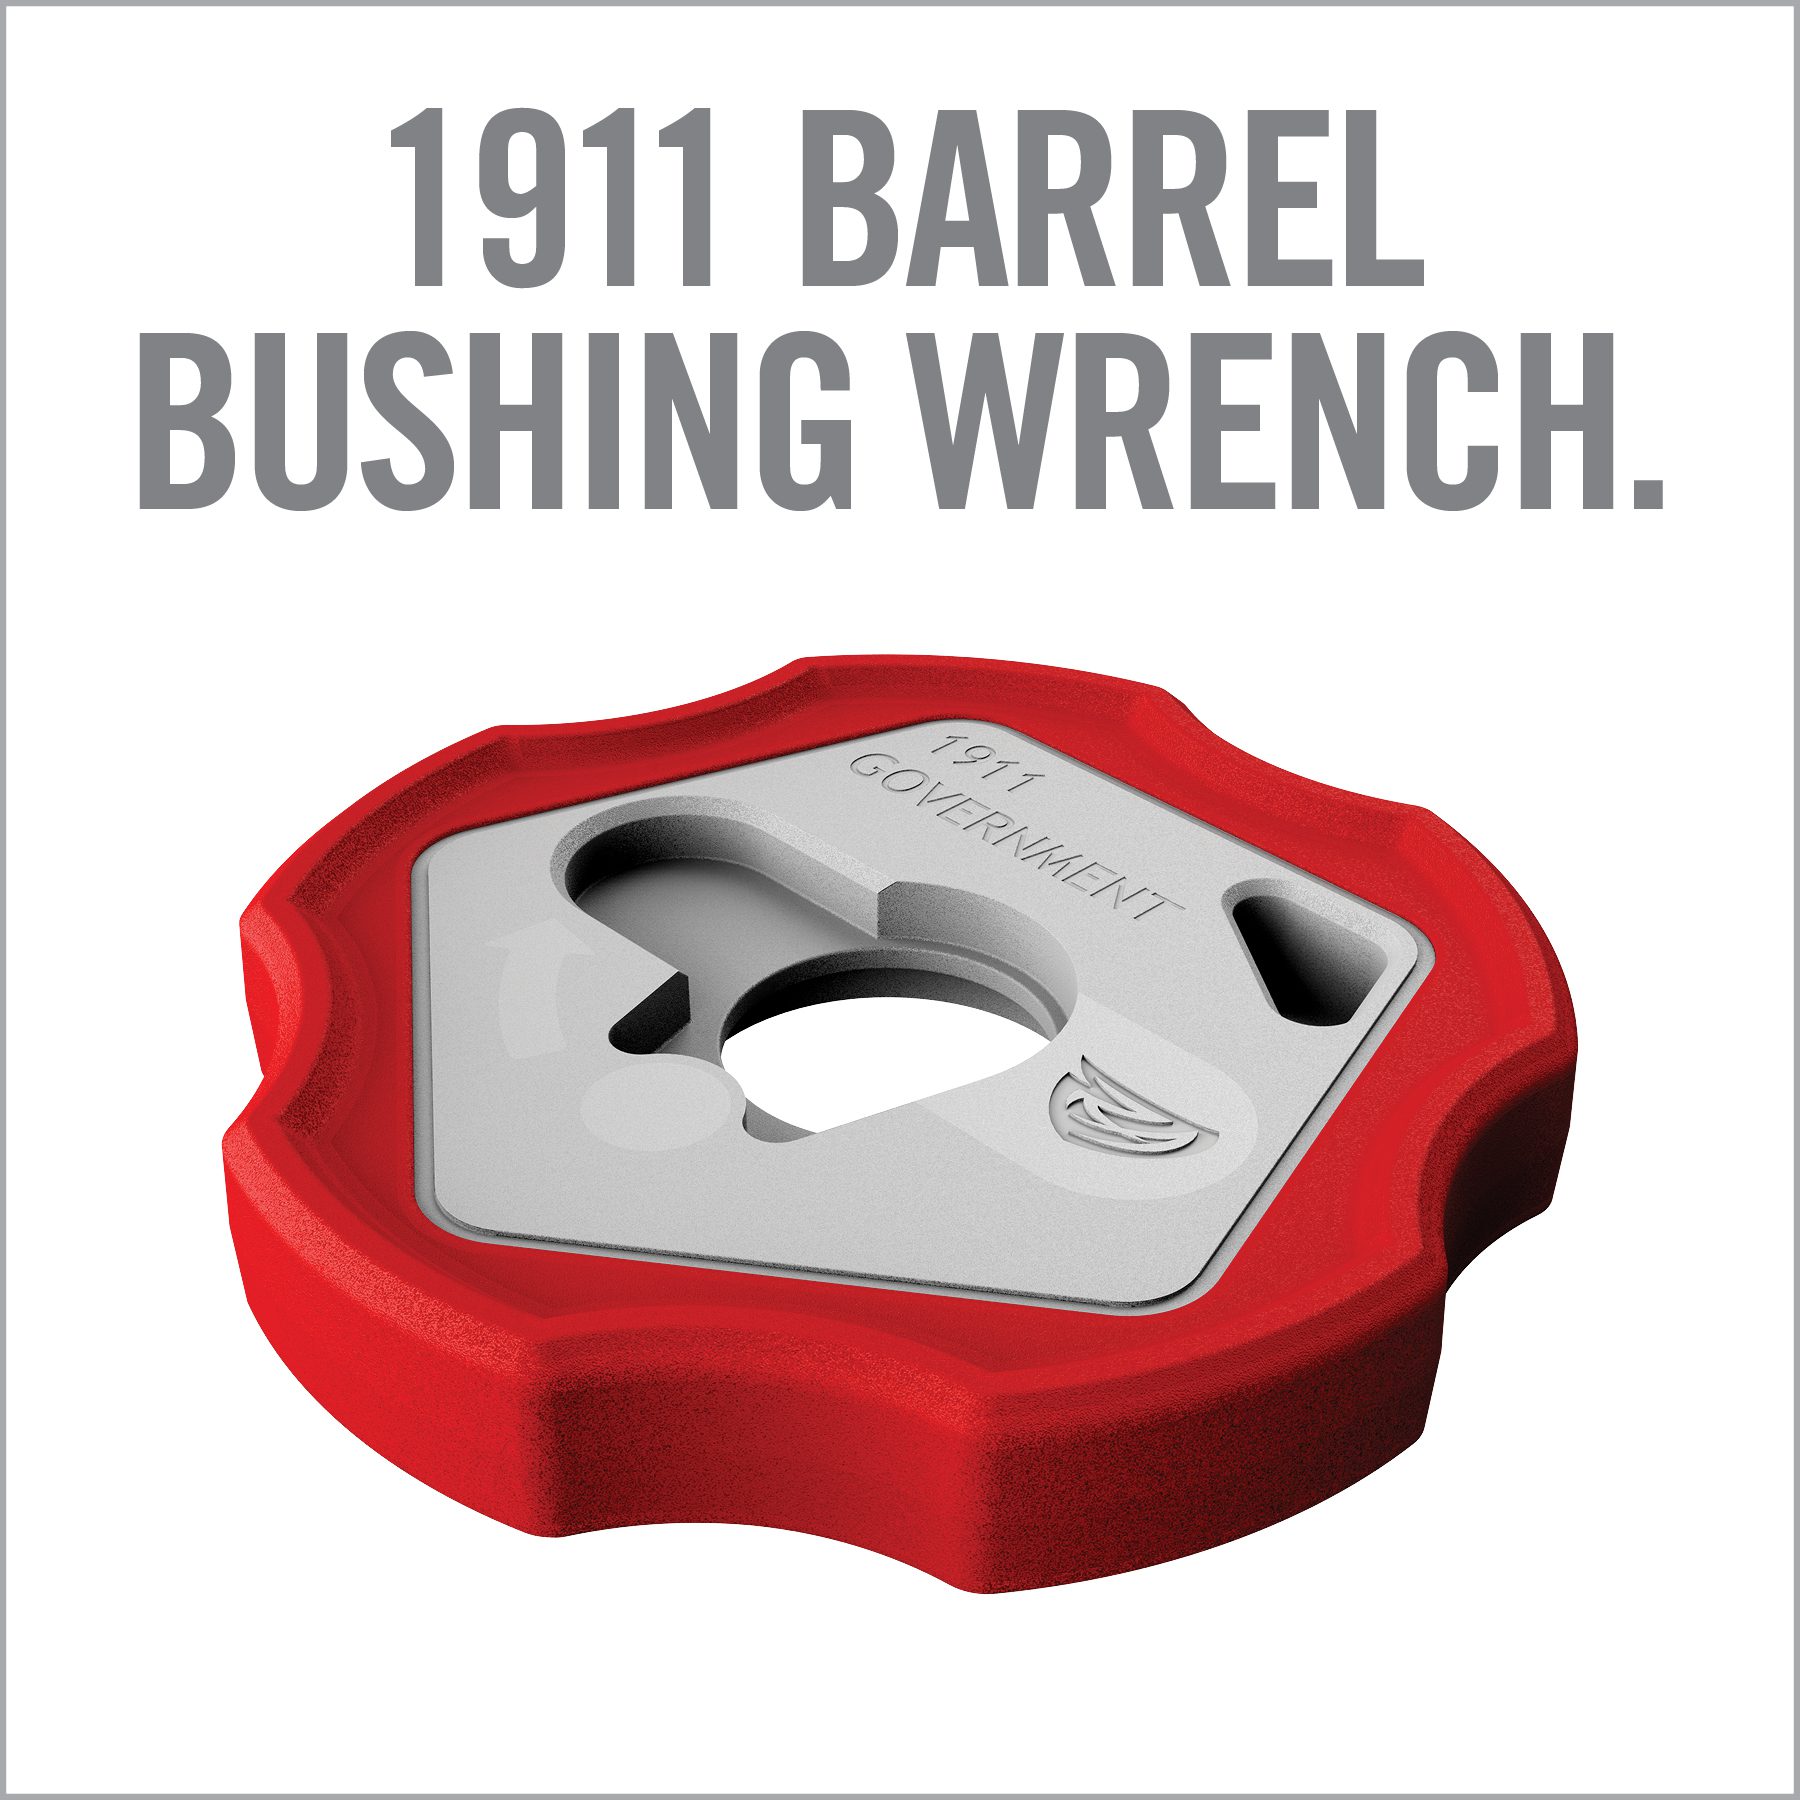 an advertisement for a bushing wrench with the words, 1911 barrel bushing wrench